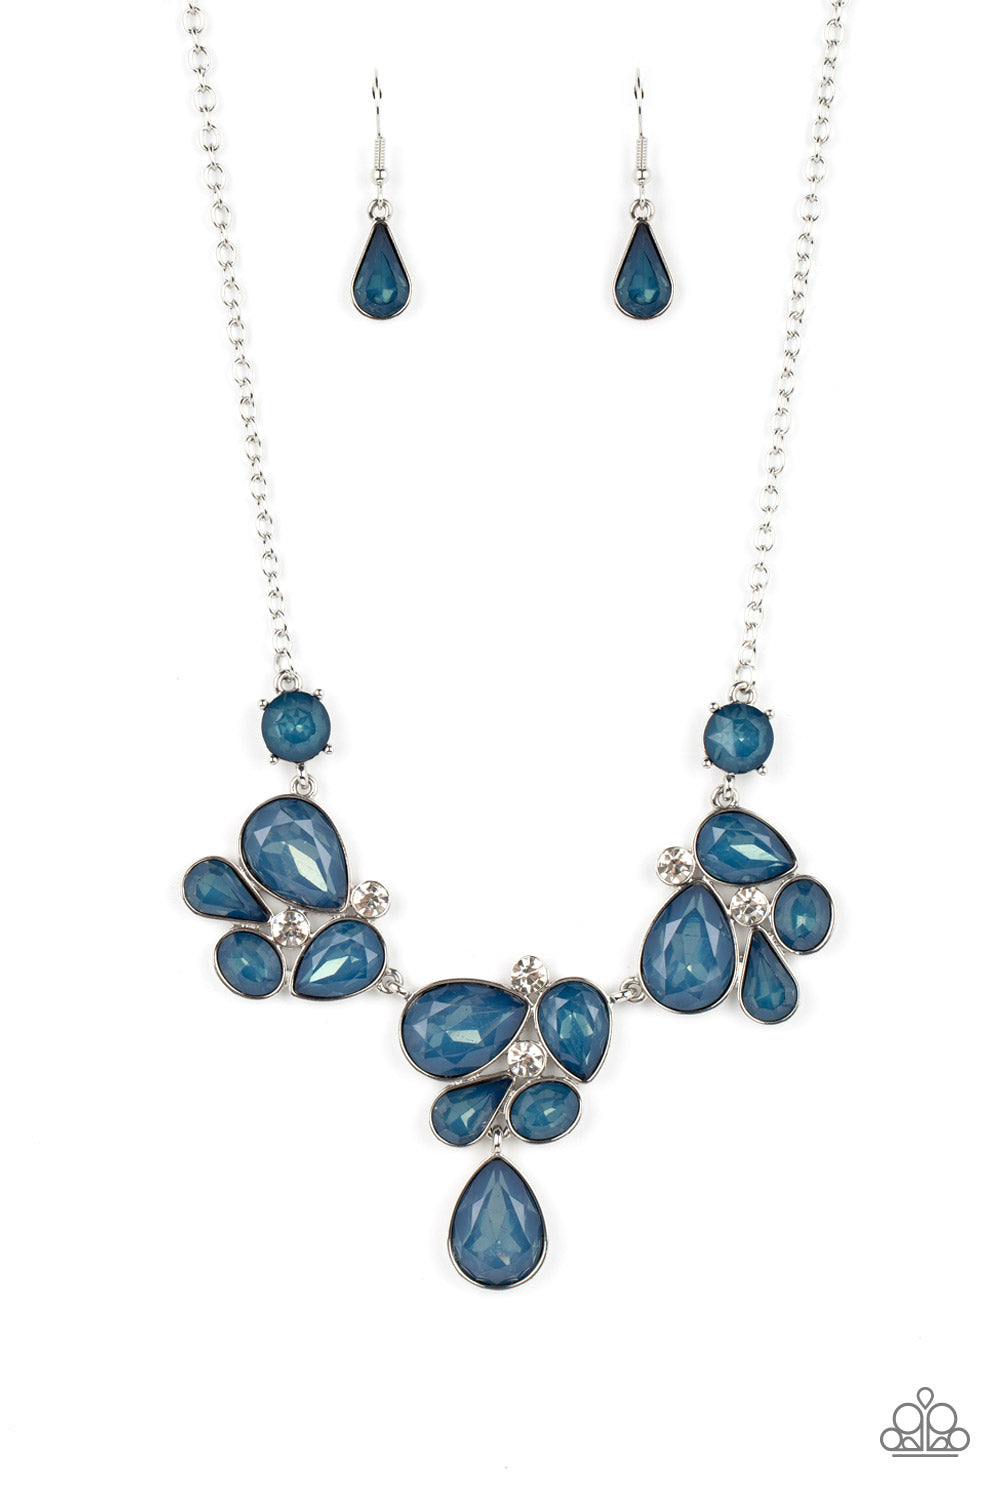 Everglade Escape Blue Necklace - Paparazzi Accessories  Draped elegantly across the chest, clusters of geometric blue gems, brushed in the fall Pantone® of Midnight, gather around sparkling white rhinestones, creating a bright and beautiful pattern. Features an adjustable clasp closure.  Sold as one individual necklace. Includes one pair of matching earrings.